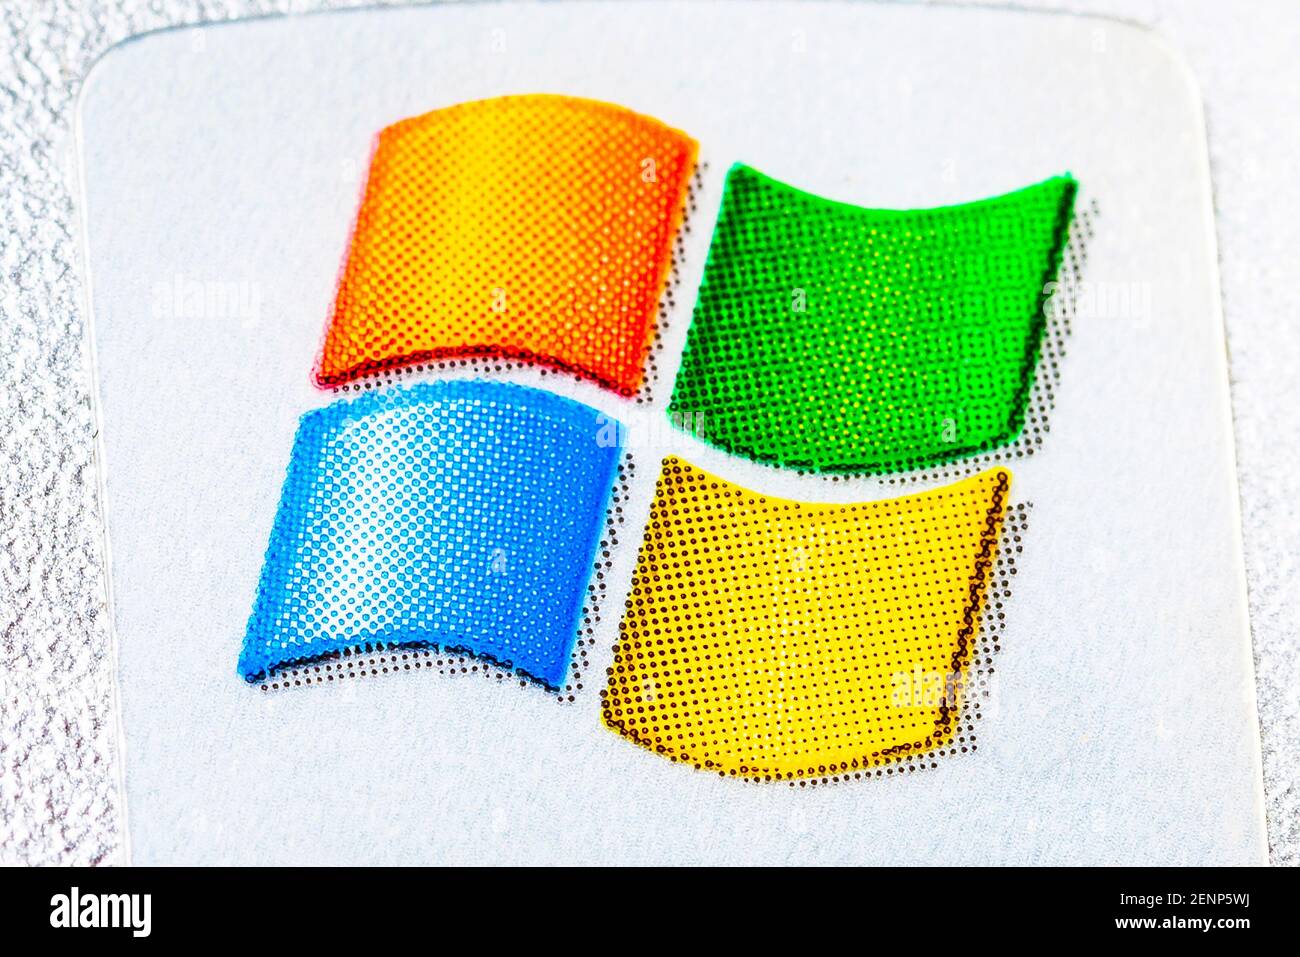 Microsoft Windows XP, Windows 7 operating system logo, brand symbol sticker label macro, extreme closeup, detail. Old, outdated OS safety concept, nob Stock Photo